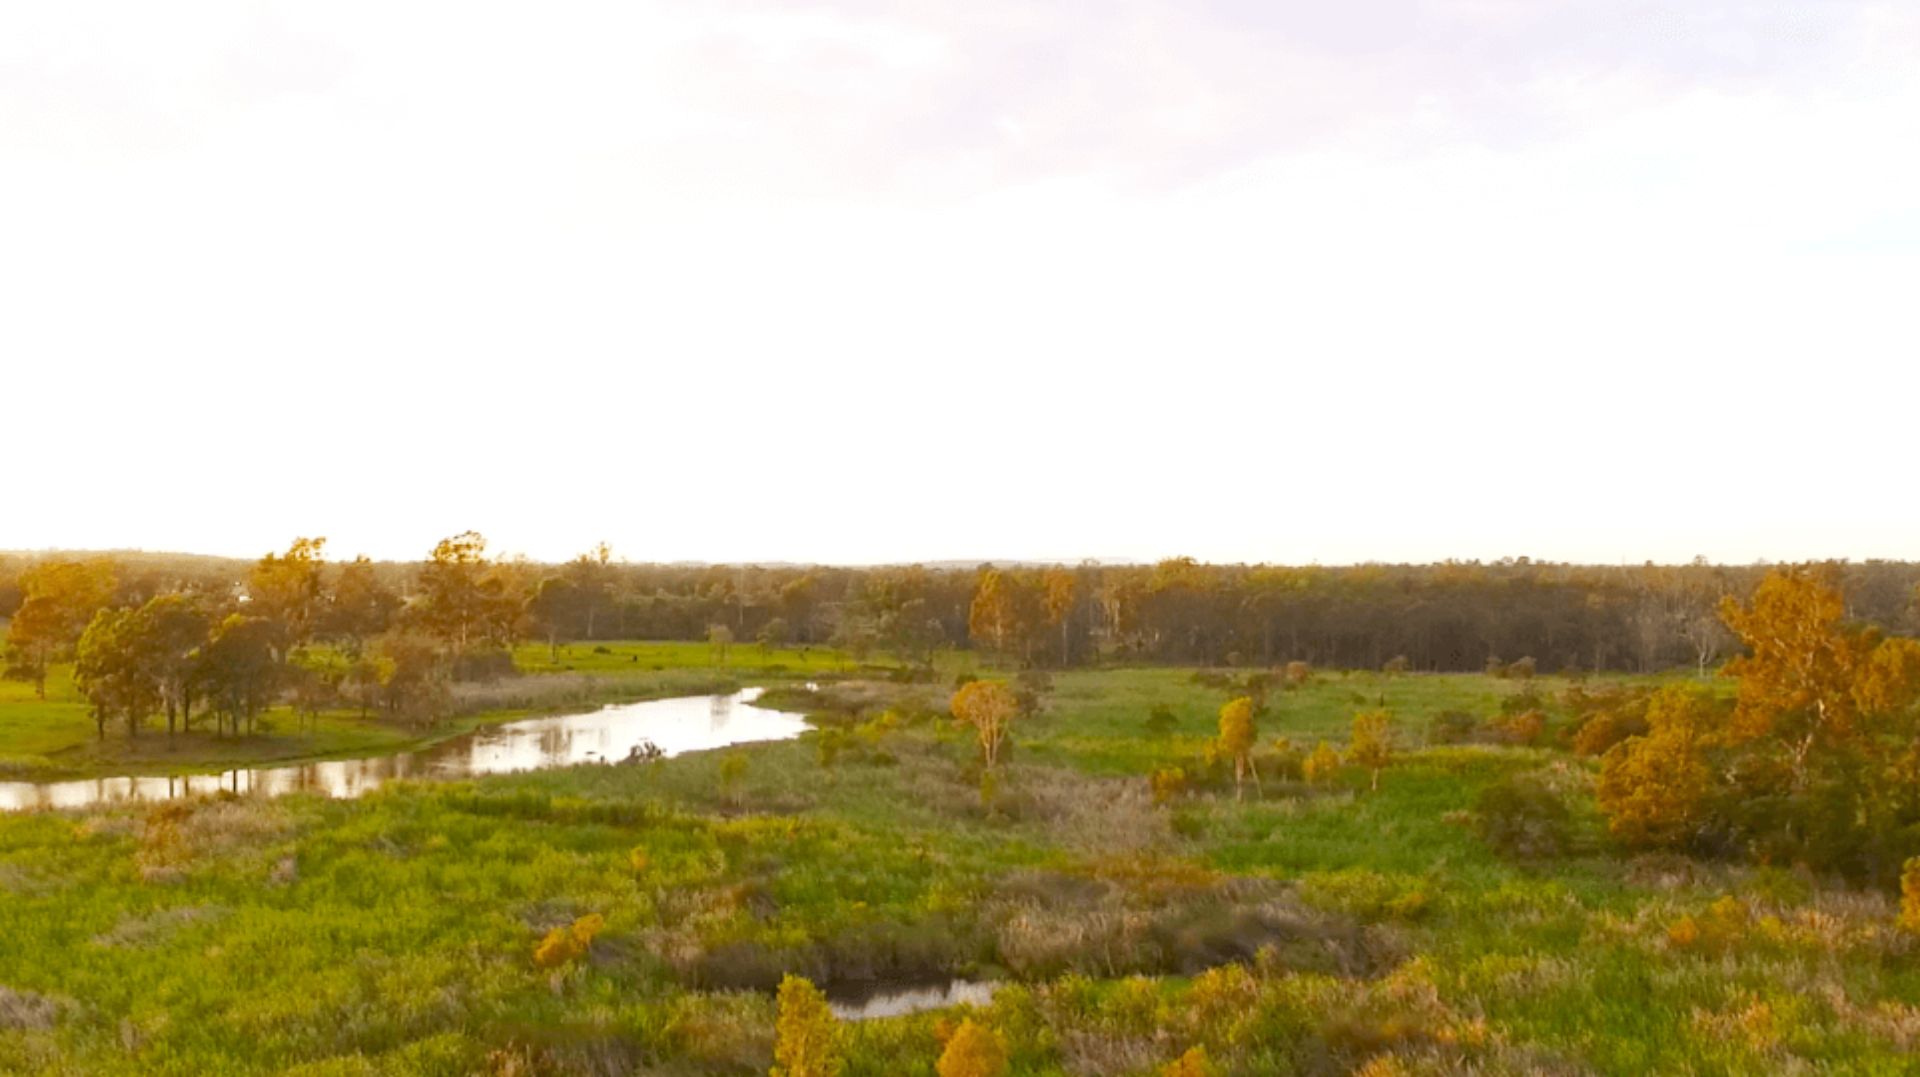 Our latest Drupal build: Oxley Creek Transformation